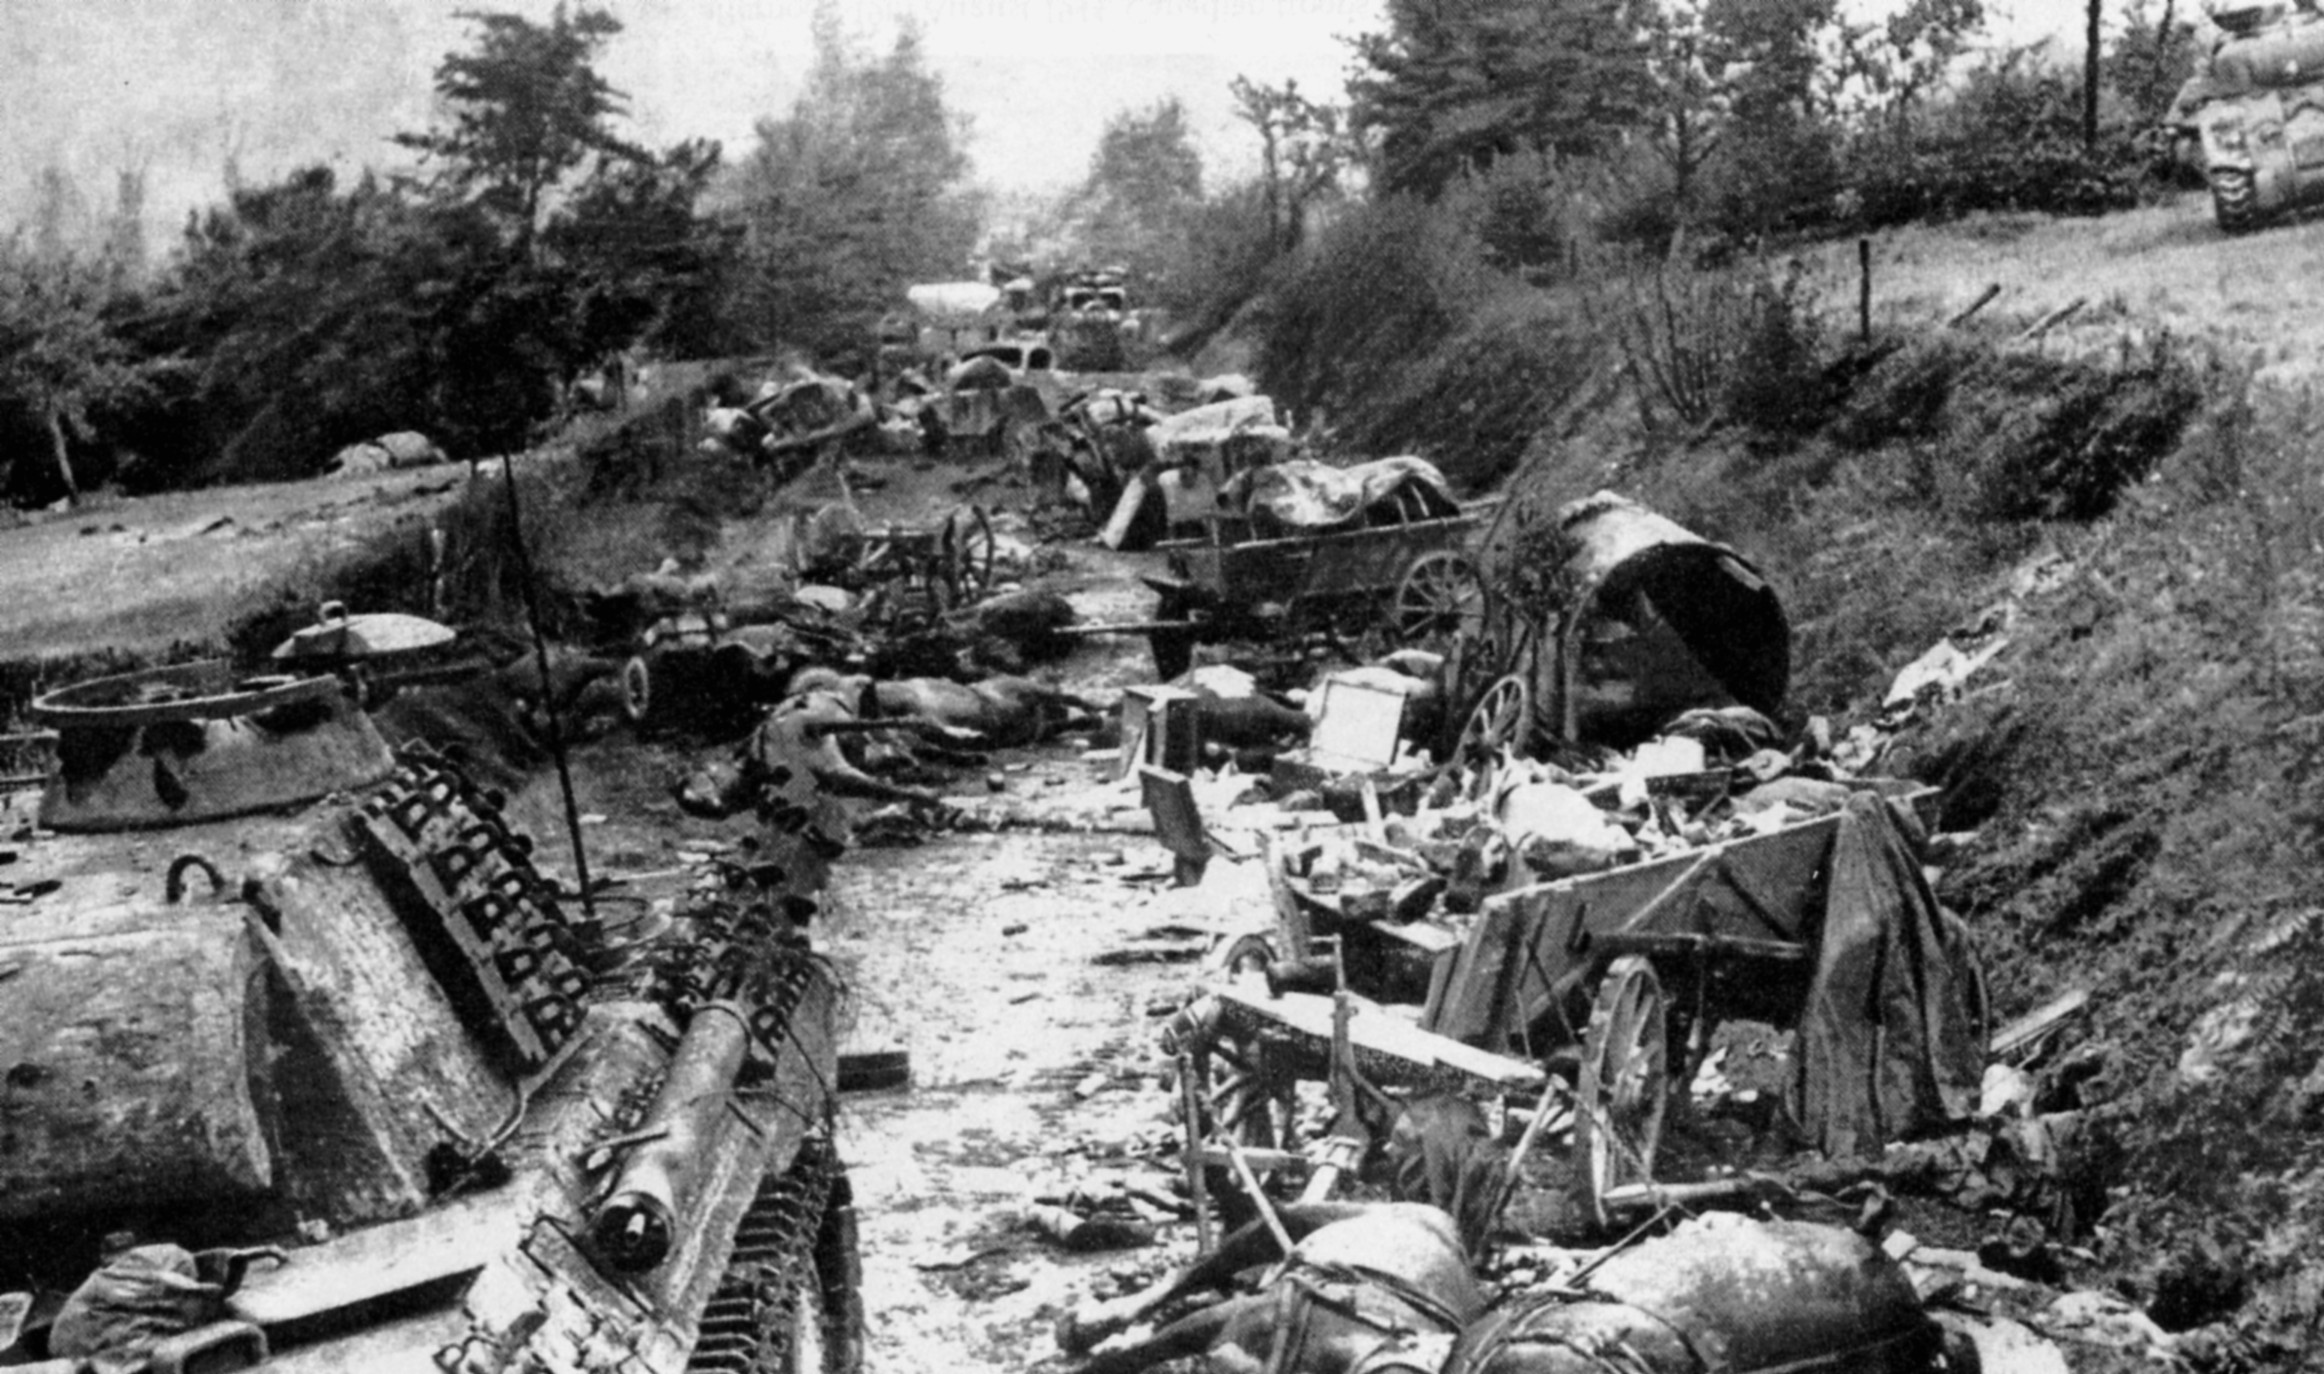 Hard-charging Polish infantry and artillery troops destroyed this retreating German column at Mont Ormel on August 18, 1944.